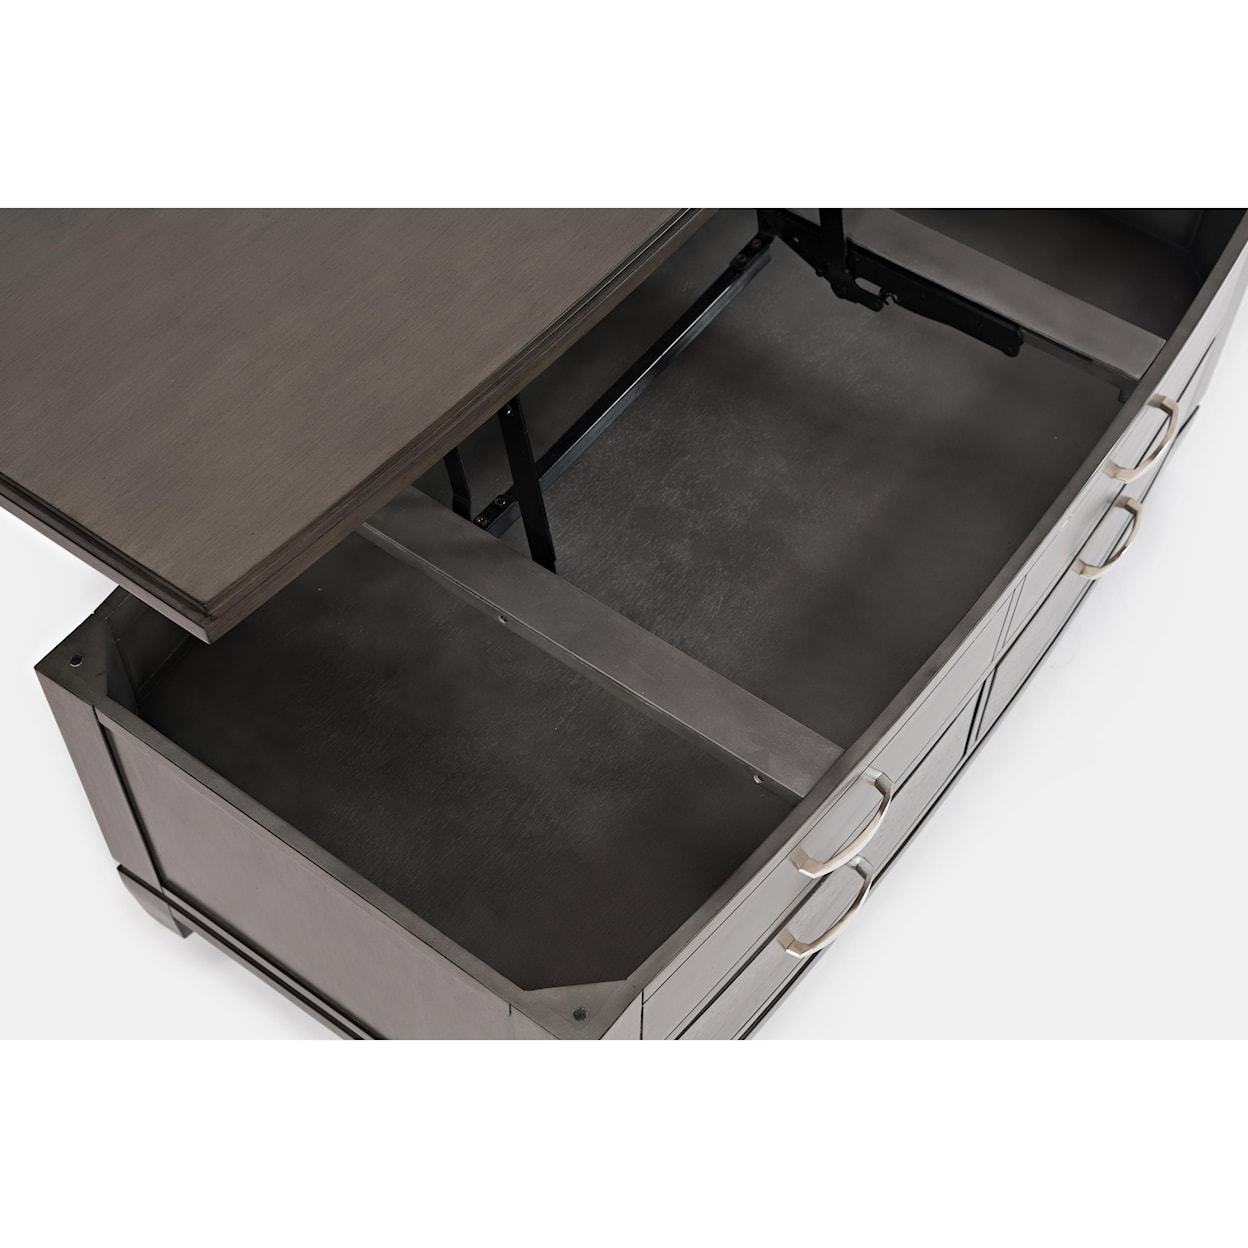 Jofran Scarsdale Lift Top Cocktail Table